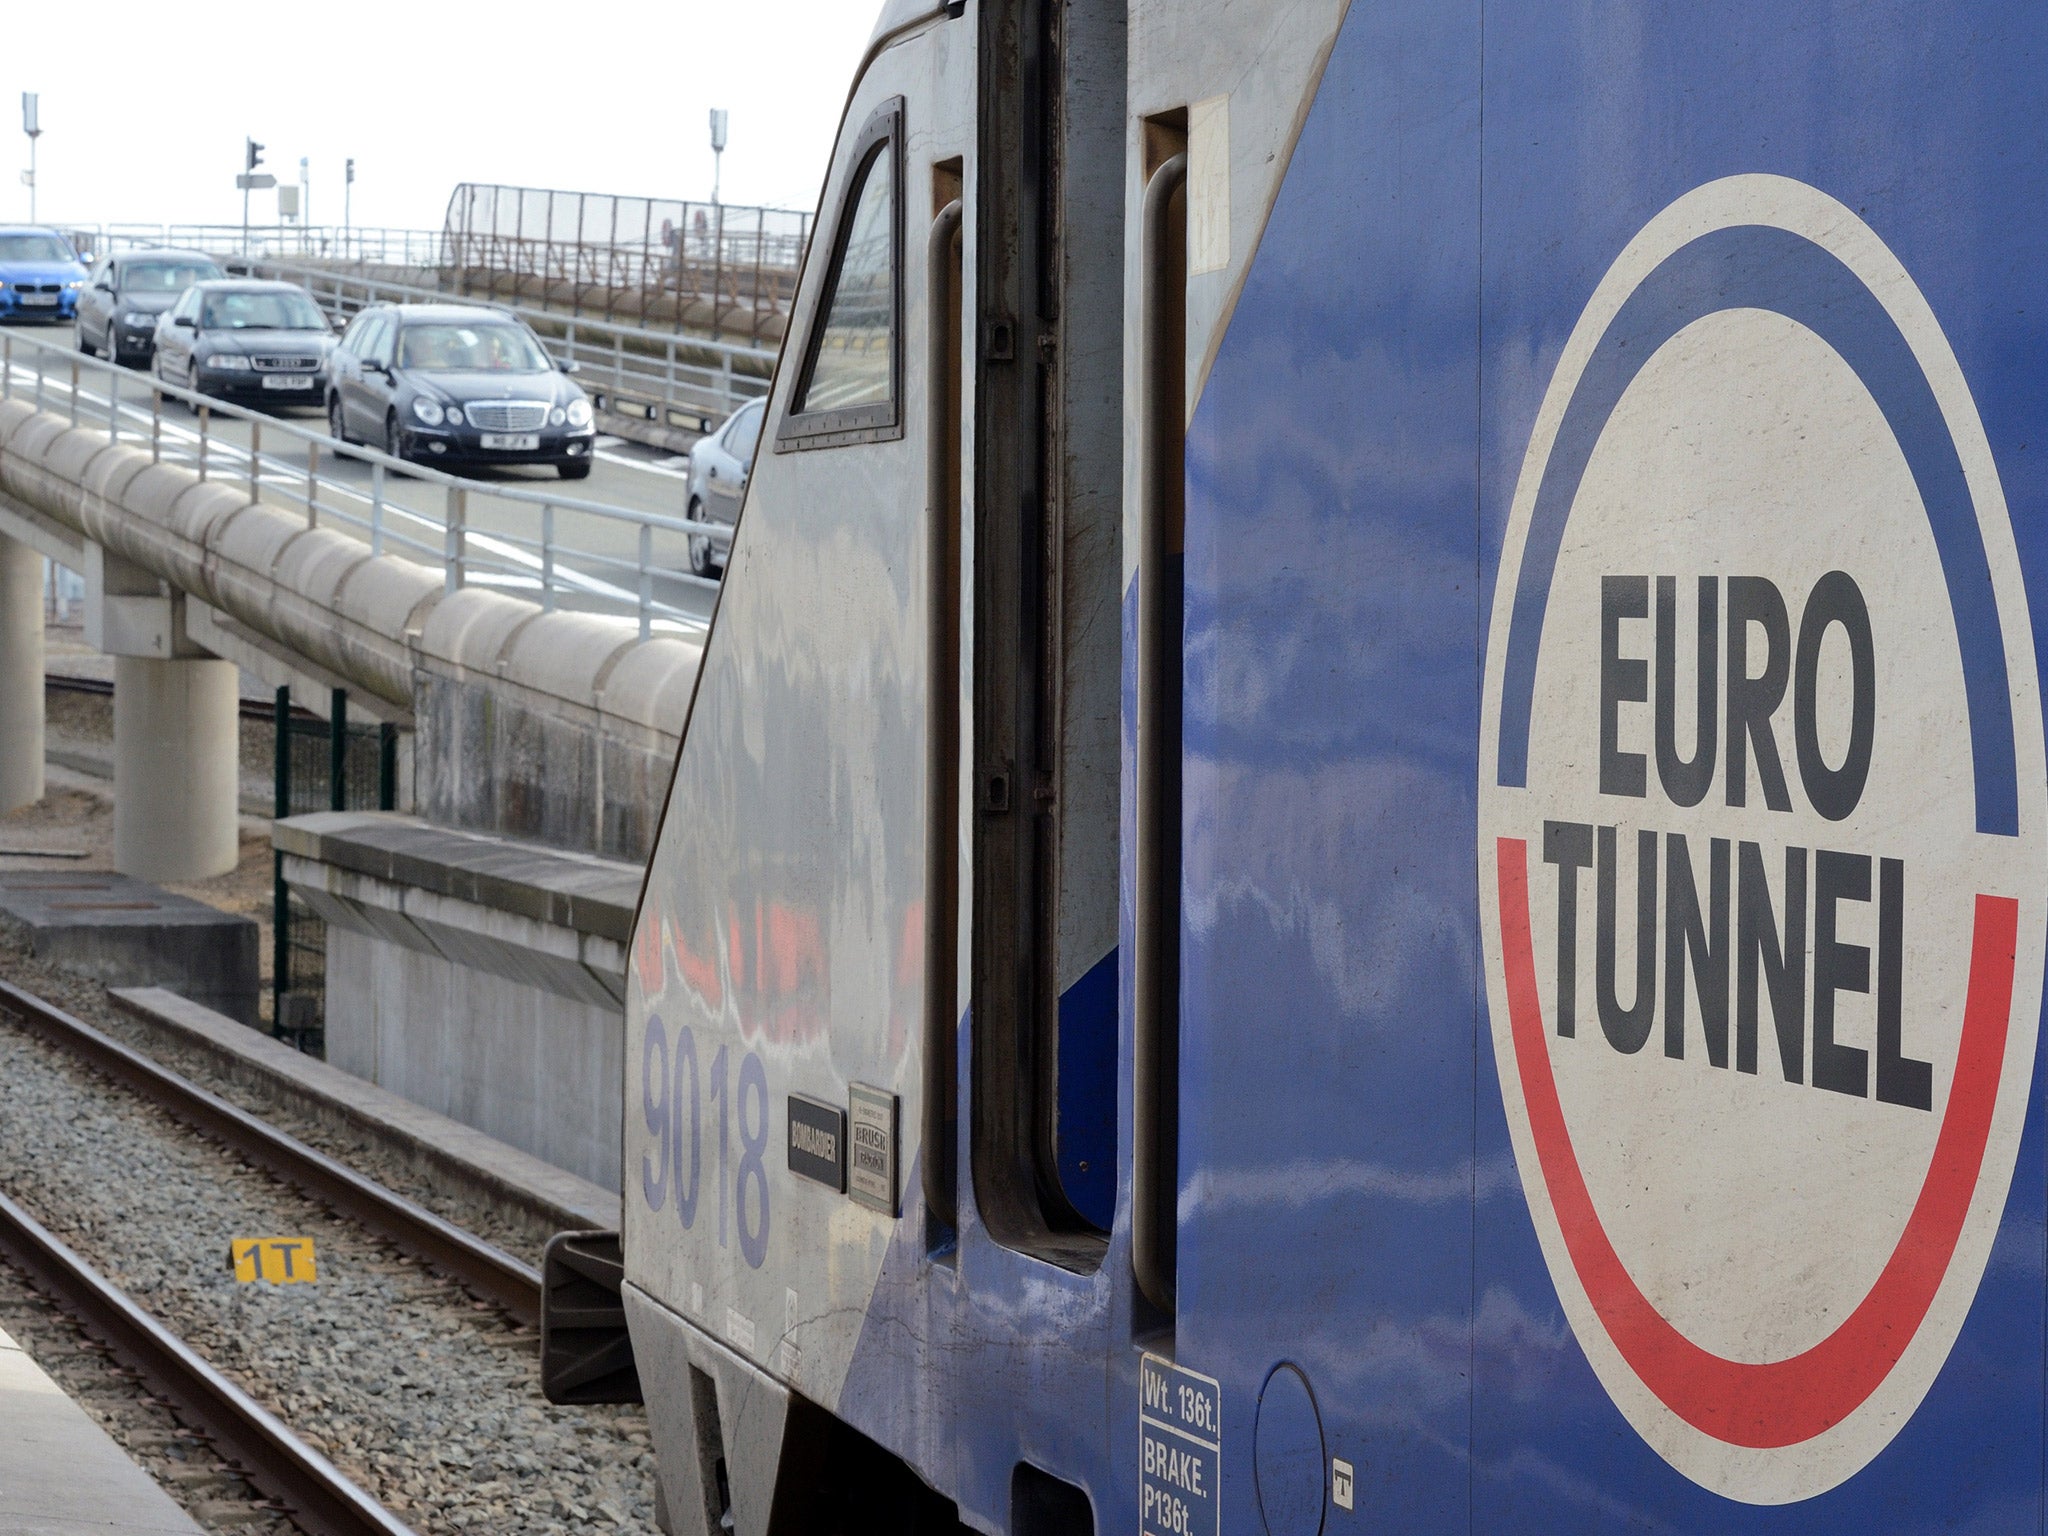 Eurotunnel, which runs car-carrying trains between Folkestone and Calais, has also revealed that most car drivers and passengers will not have their documents checked